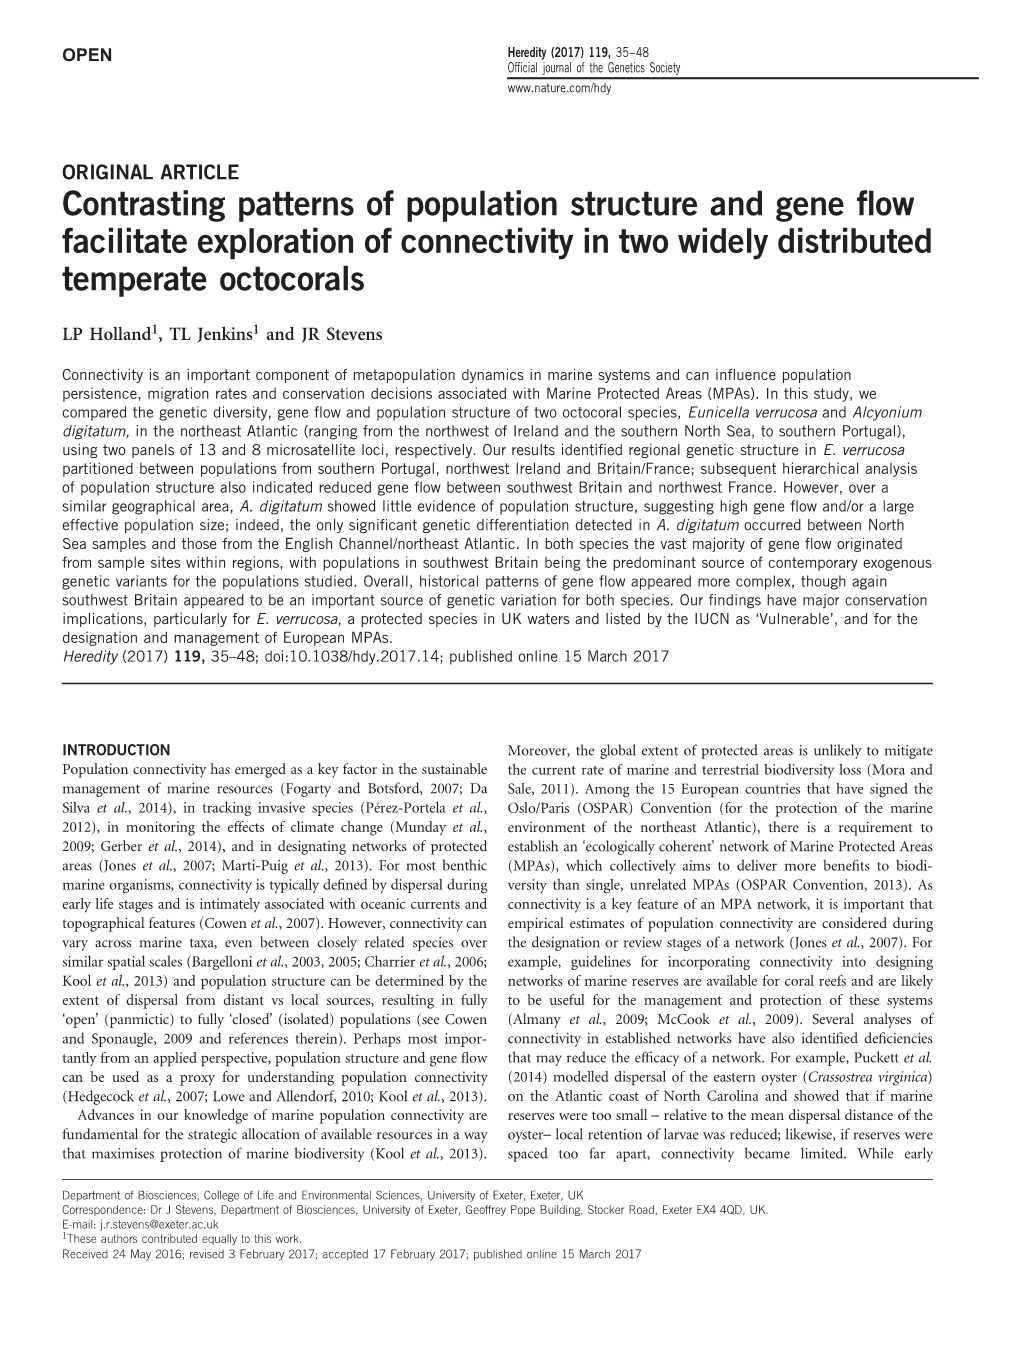 Contrasting Patterns of Population Structure and Gene Flow Facilitate